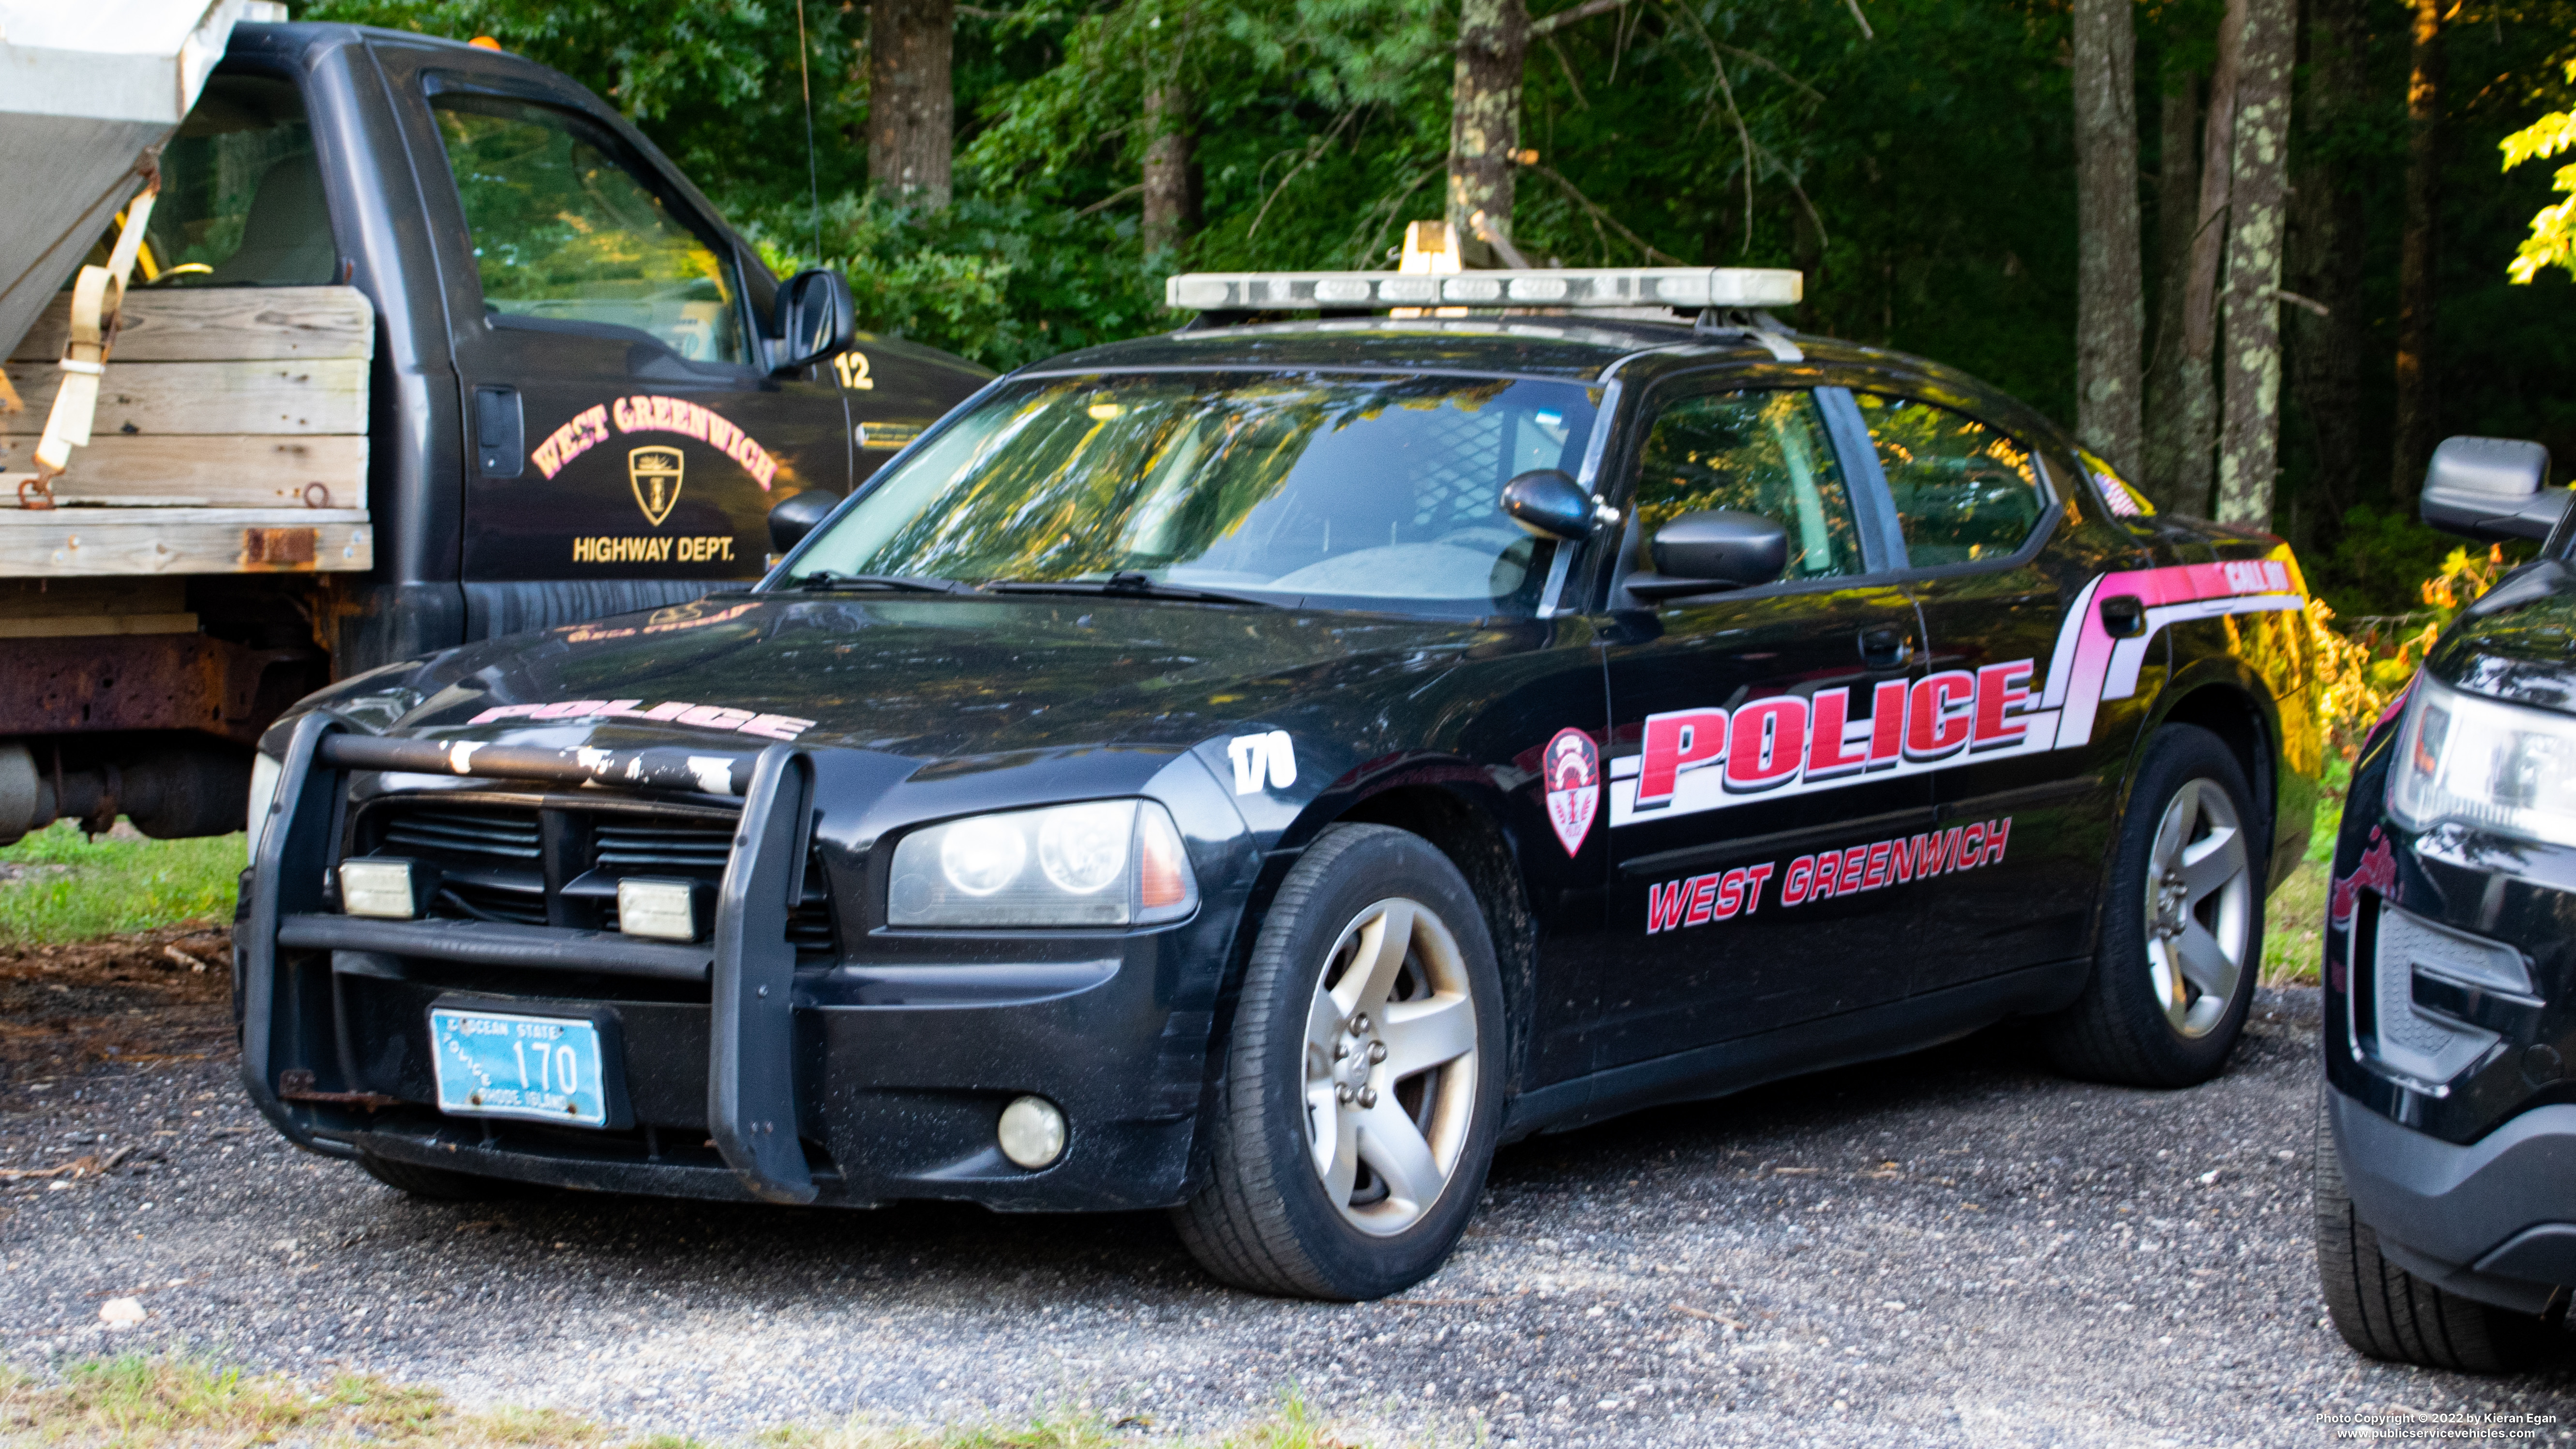 A photo  of West Greenwich Police
            Cruiser 170, a 2006-2010 Dodge Charger             taken by Kieran Egan